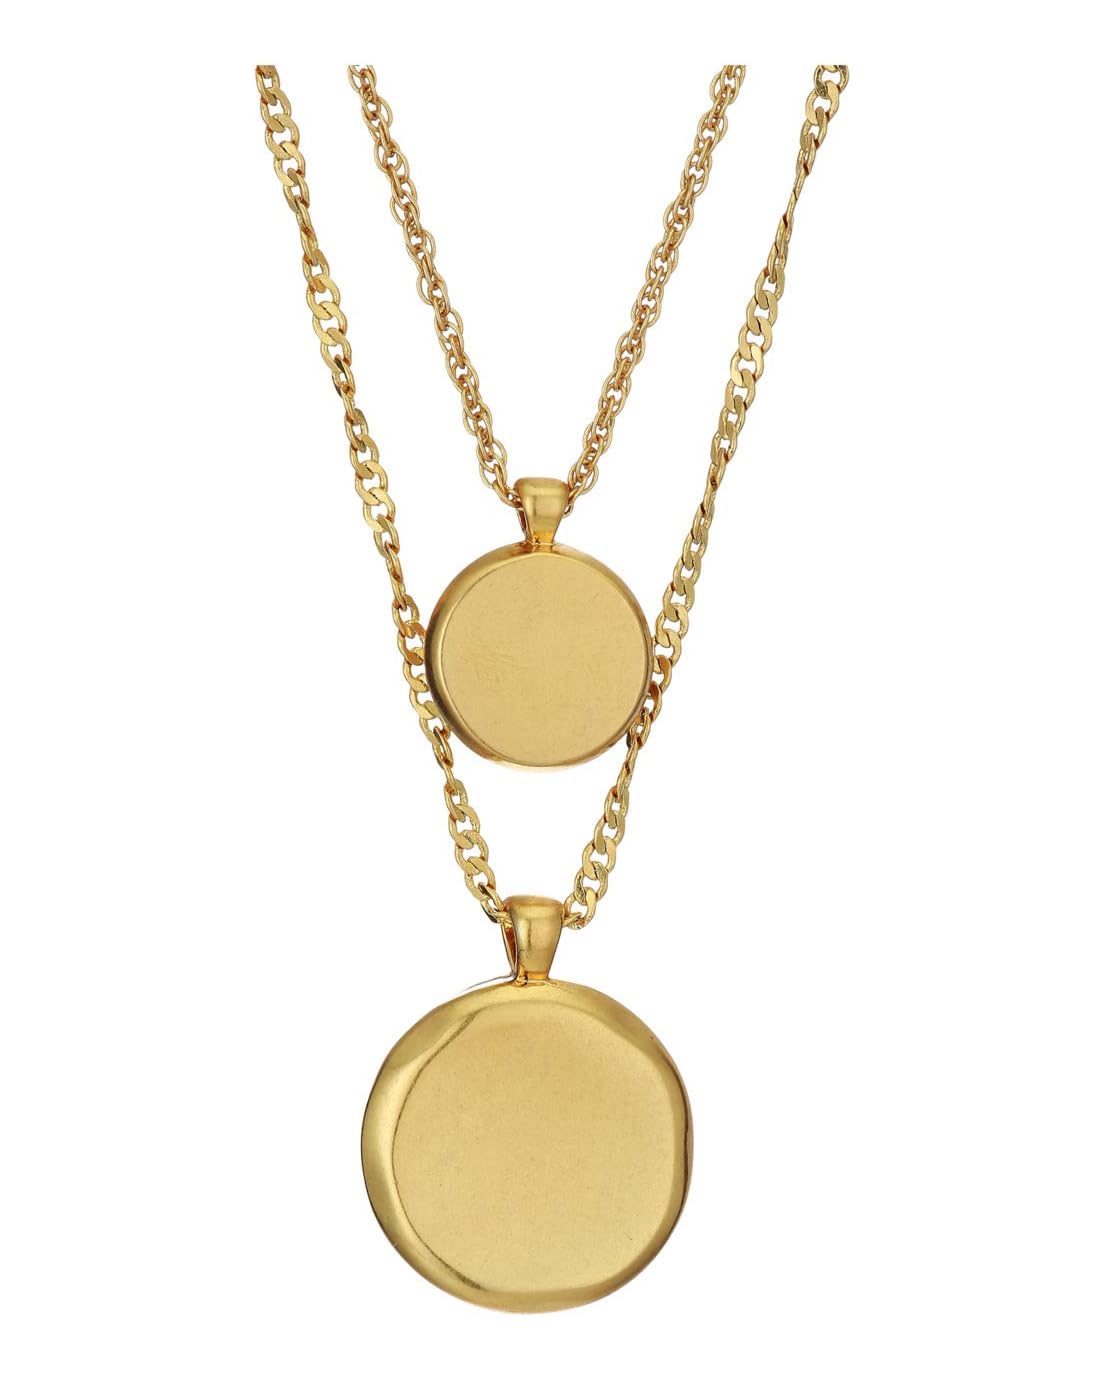 Madewell Coin Necklace Set